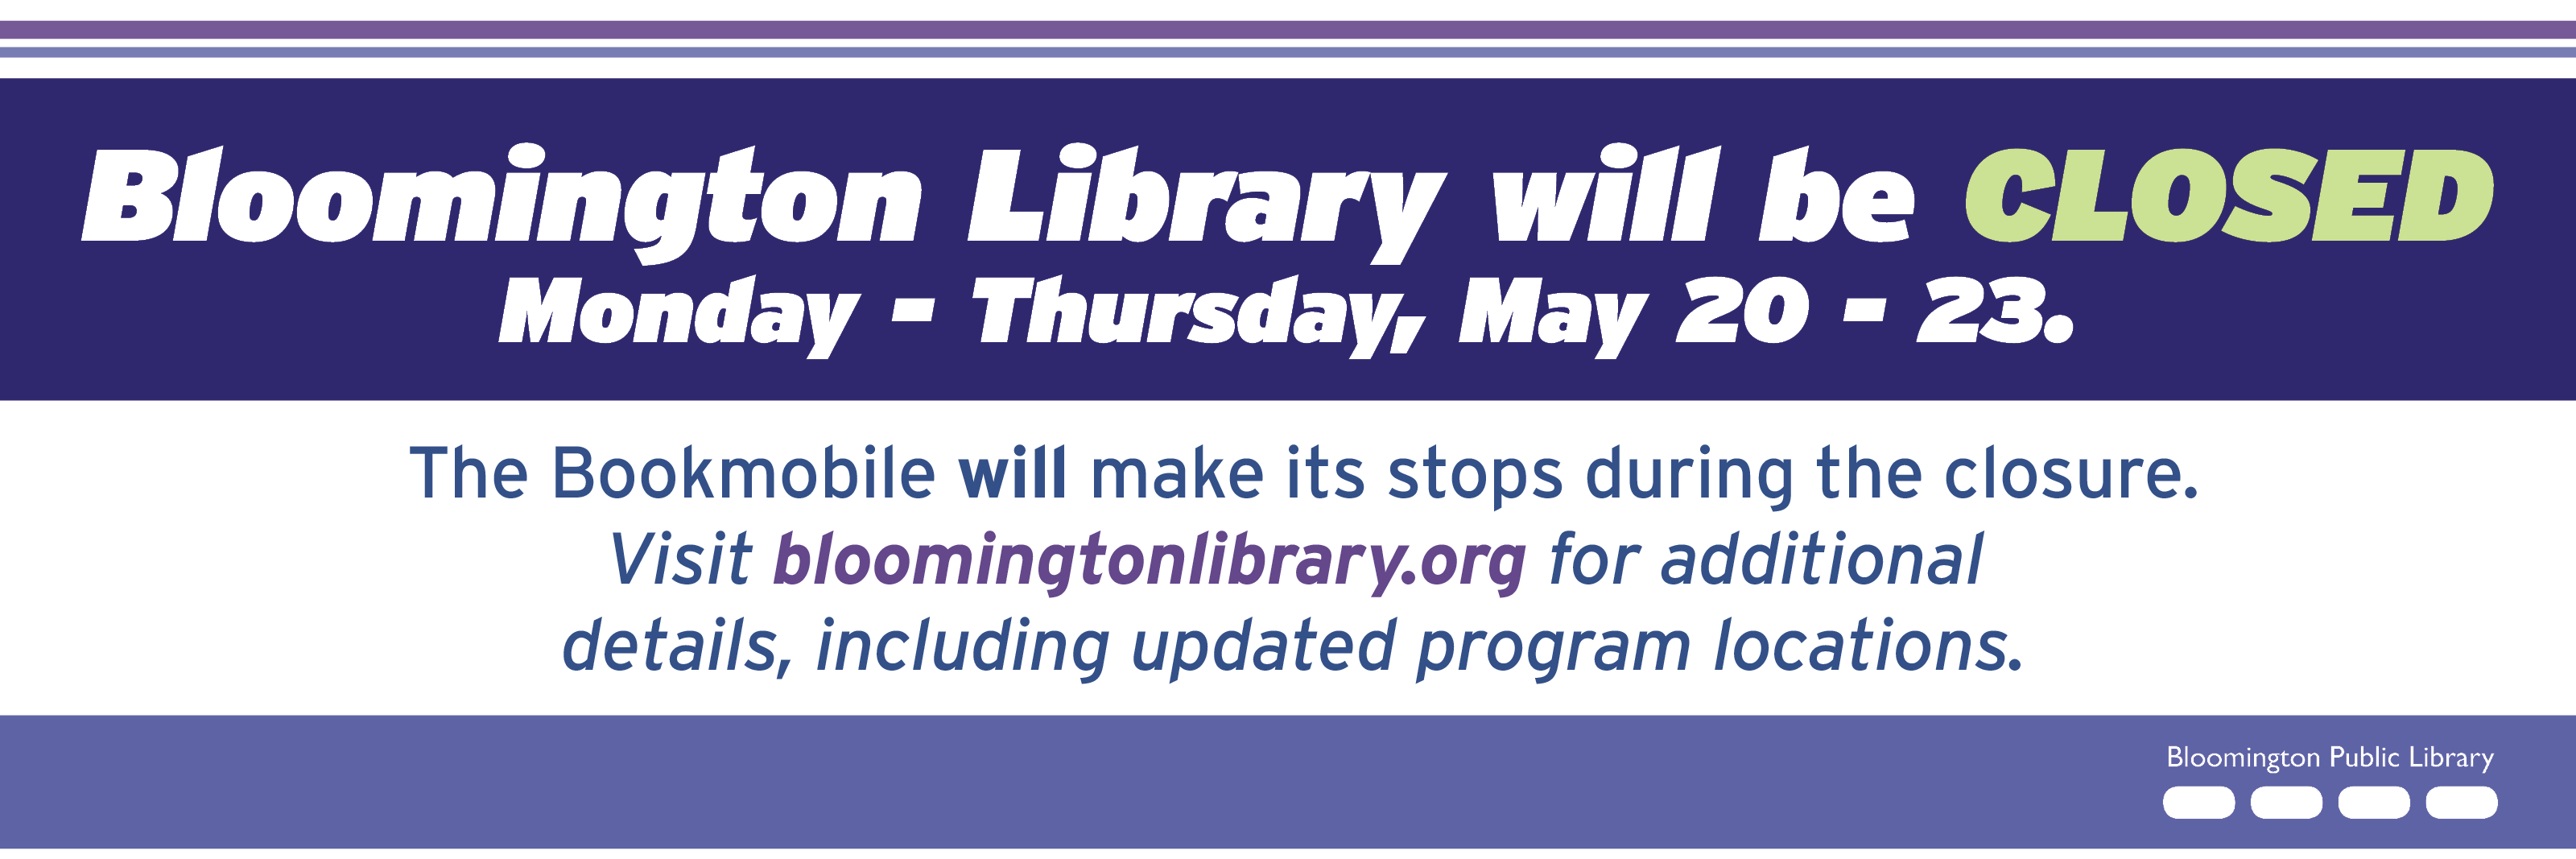 Bloomington Public Library will be closed May 20-23